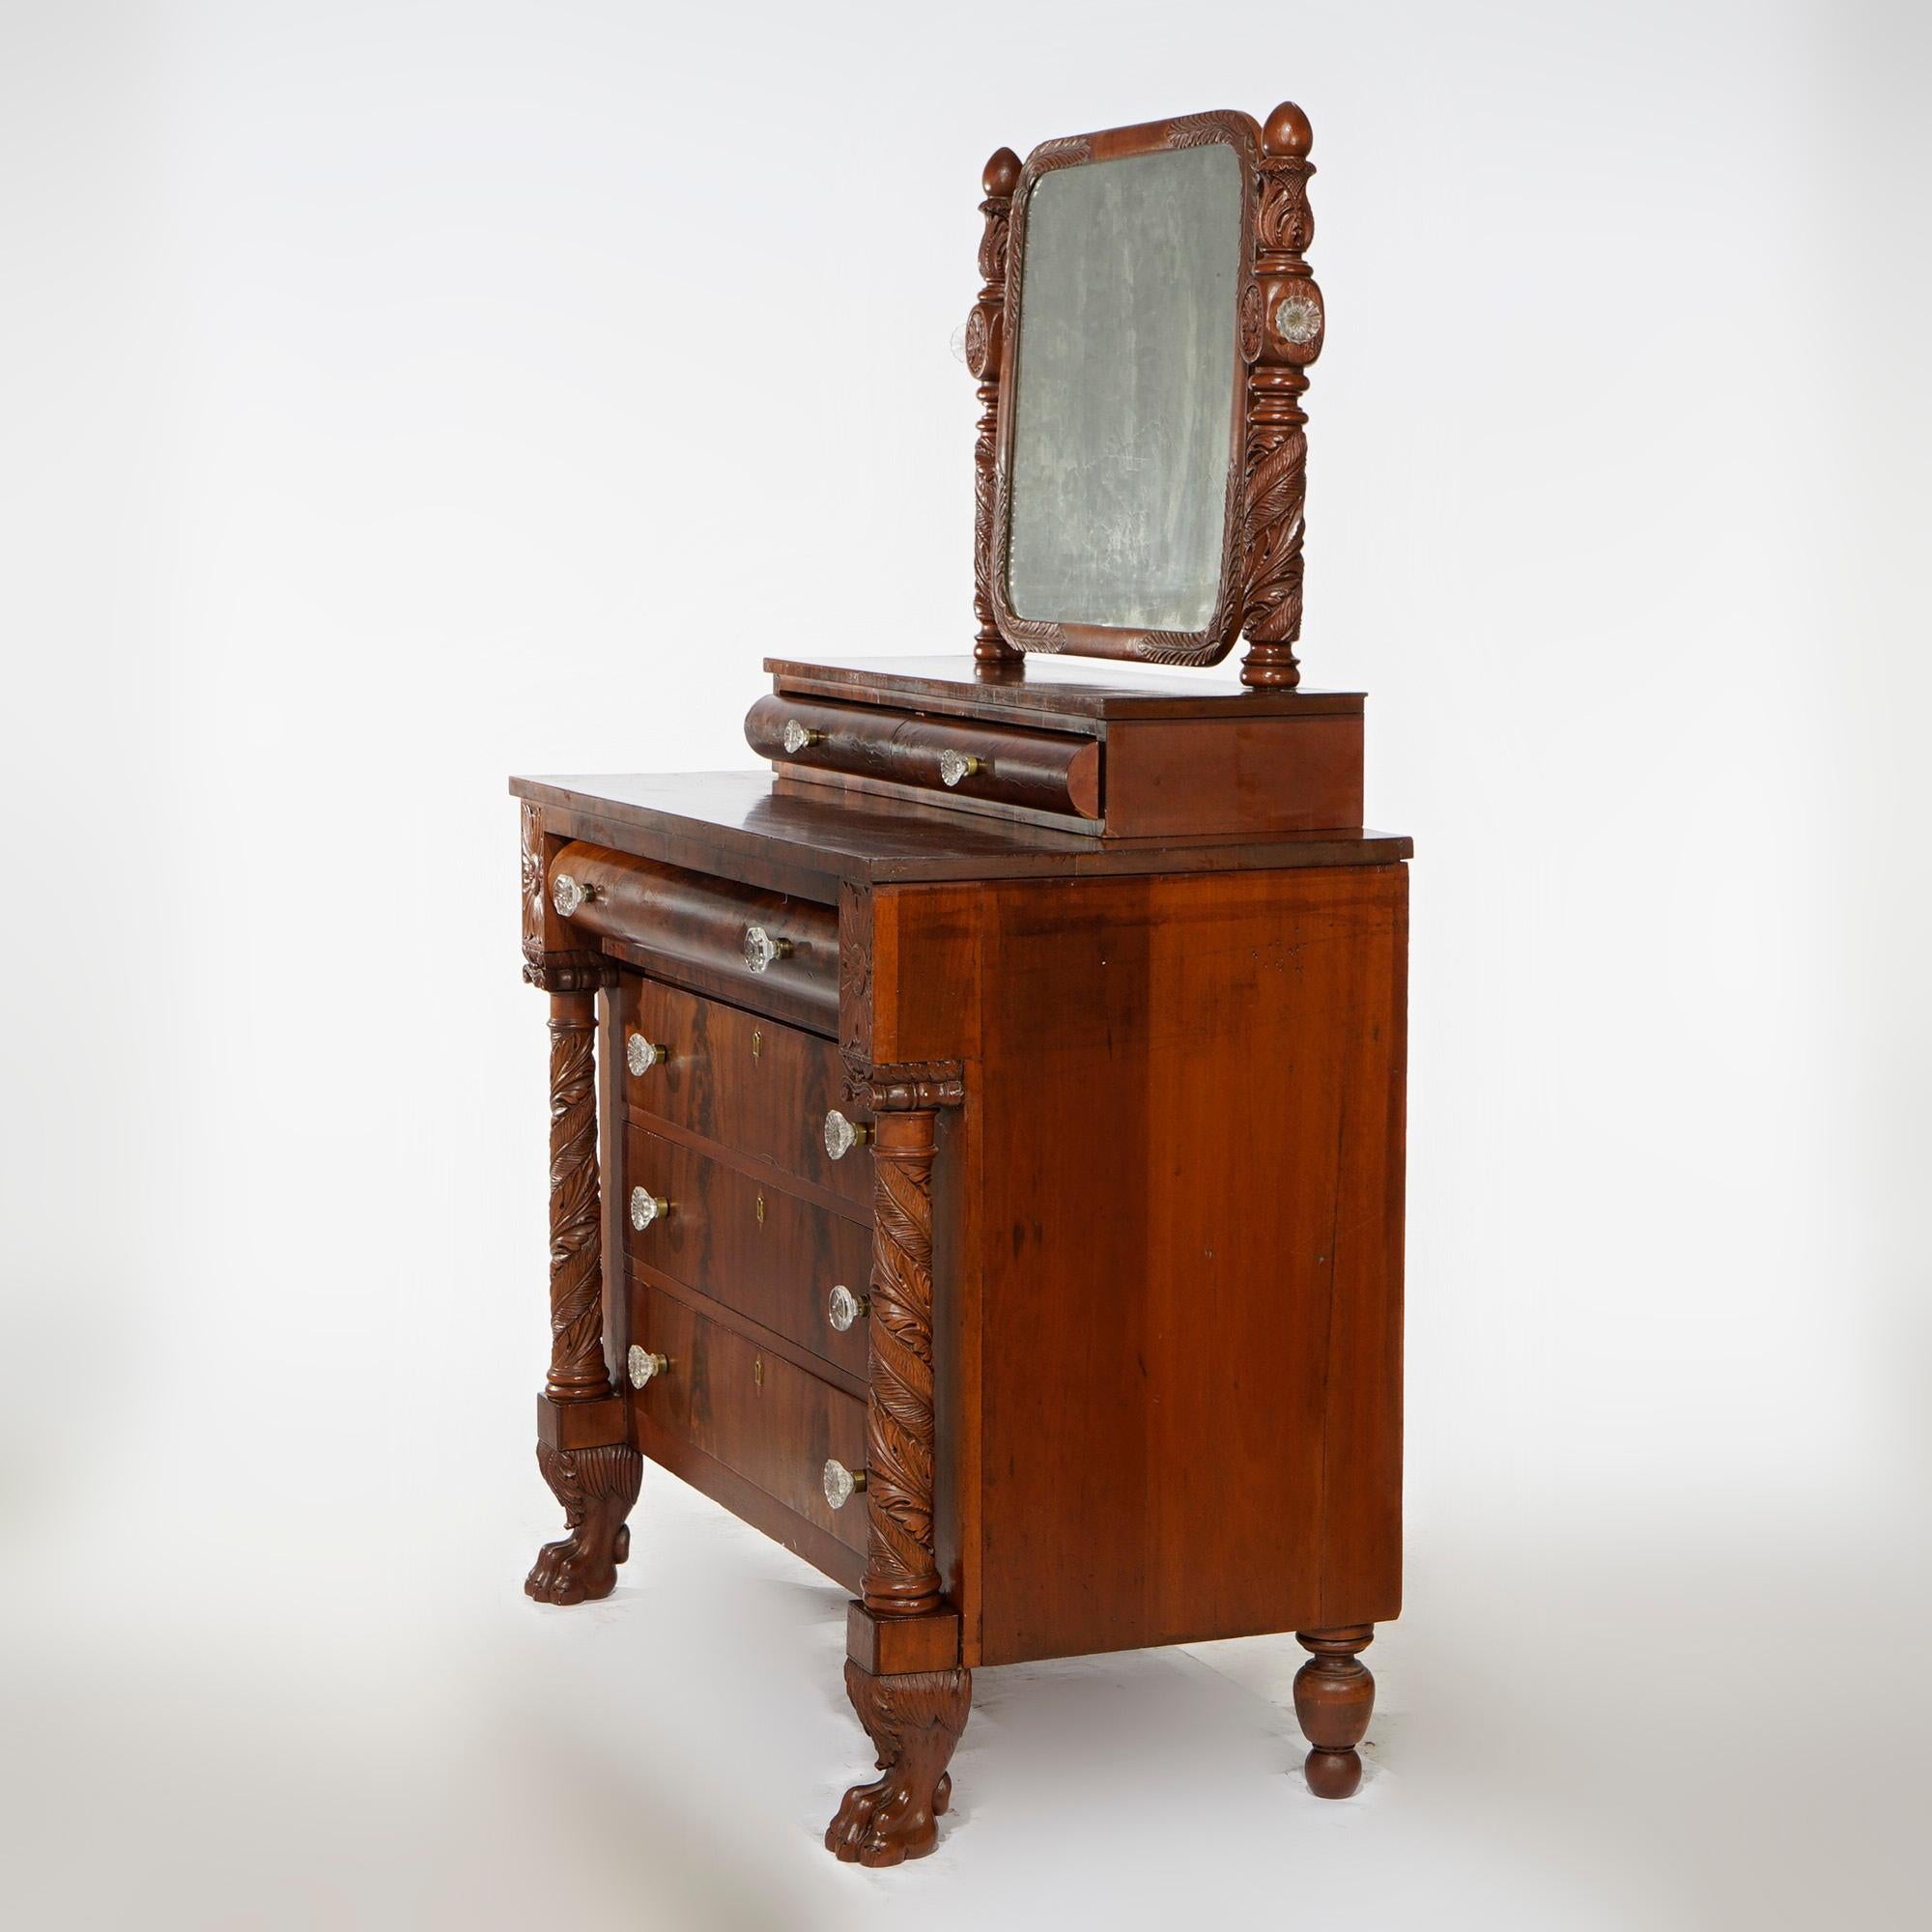 An antique American Empire chest of drawers with swivel mirror over flame mahogany chest of drawers with deeply foliate carved flanking columns and paw feet, c1840

Measures- 65'' H x 44'' W x 23.75'' D.